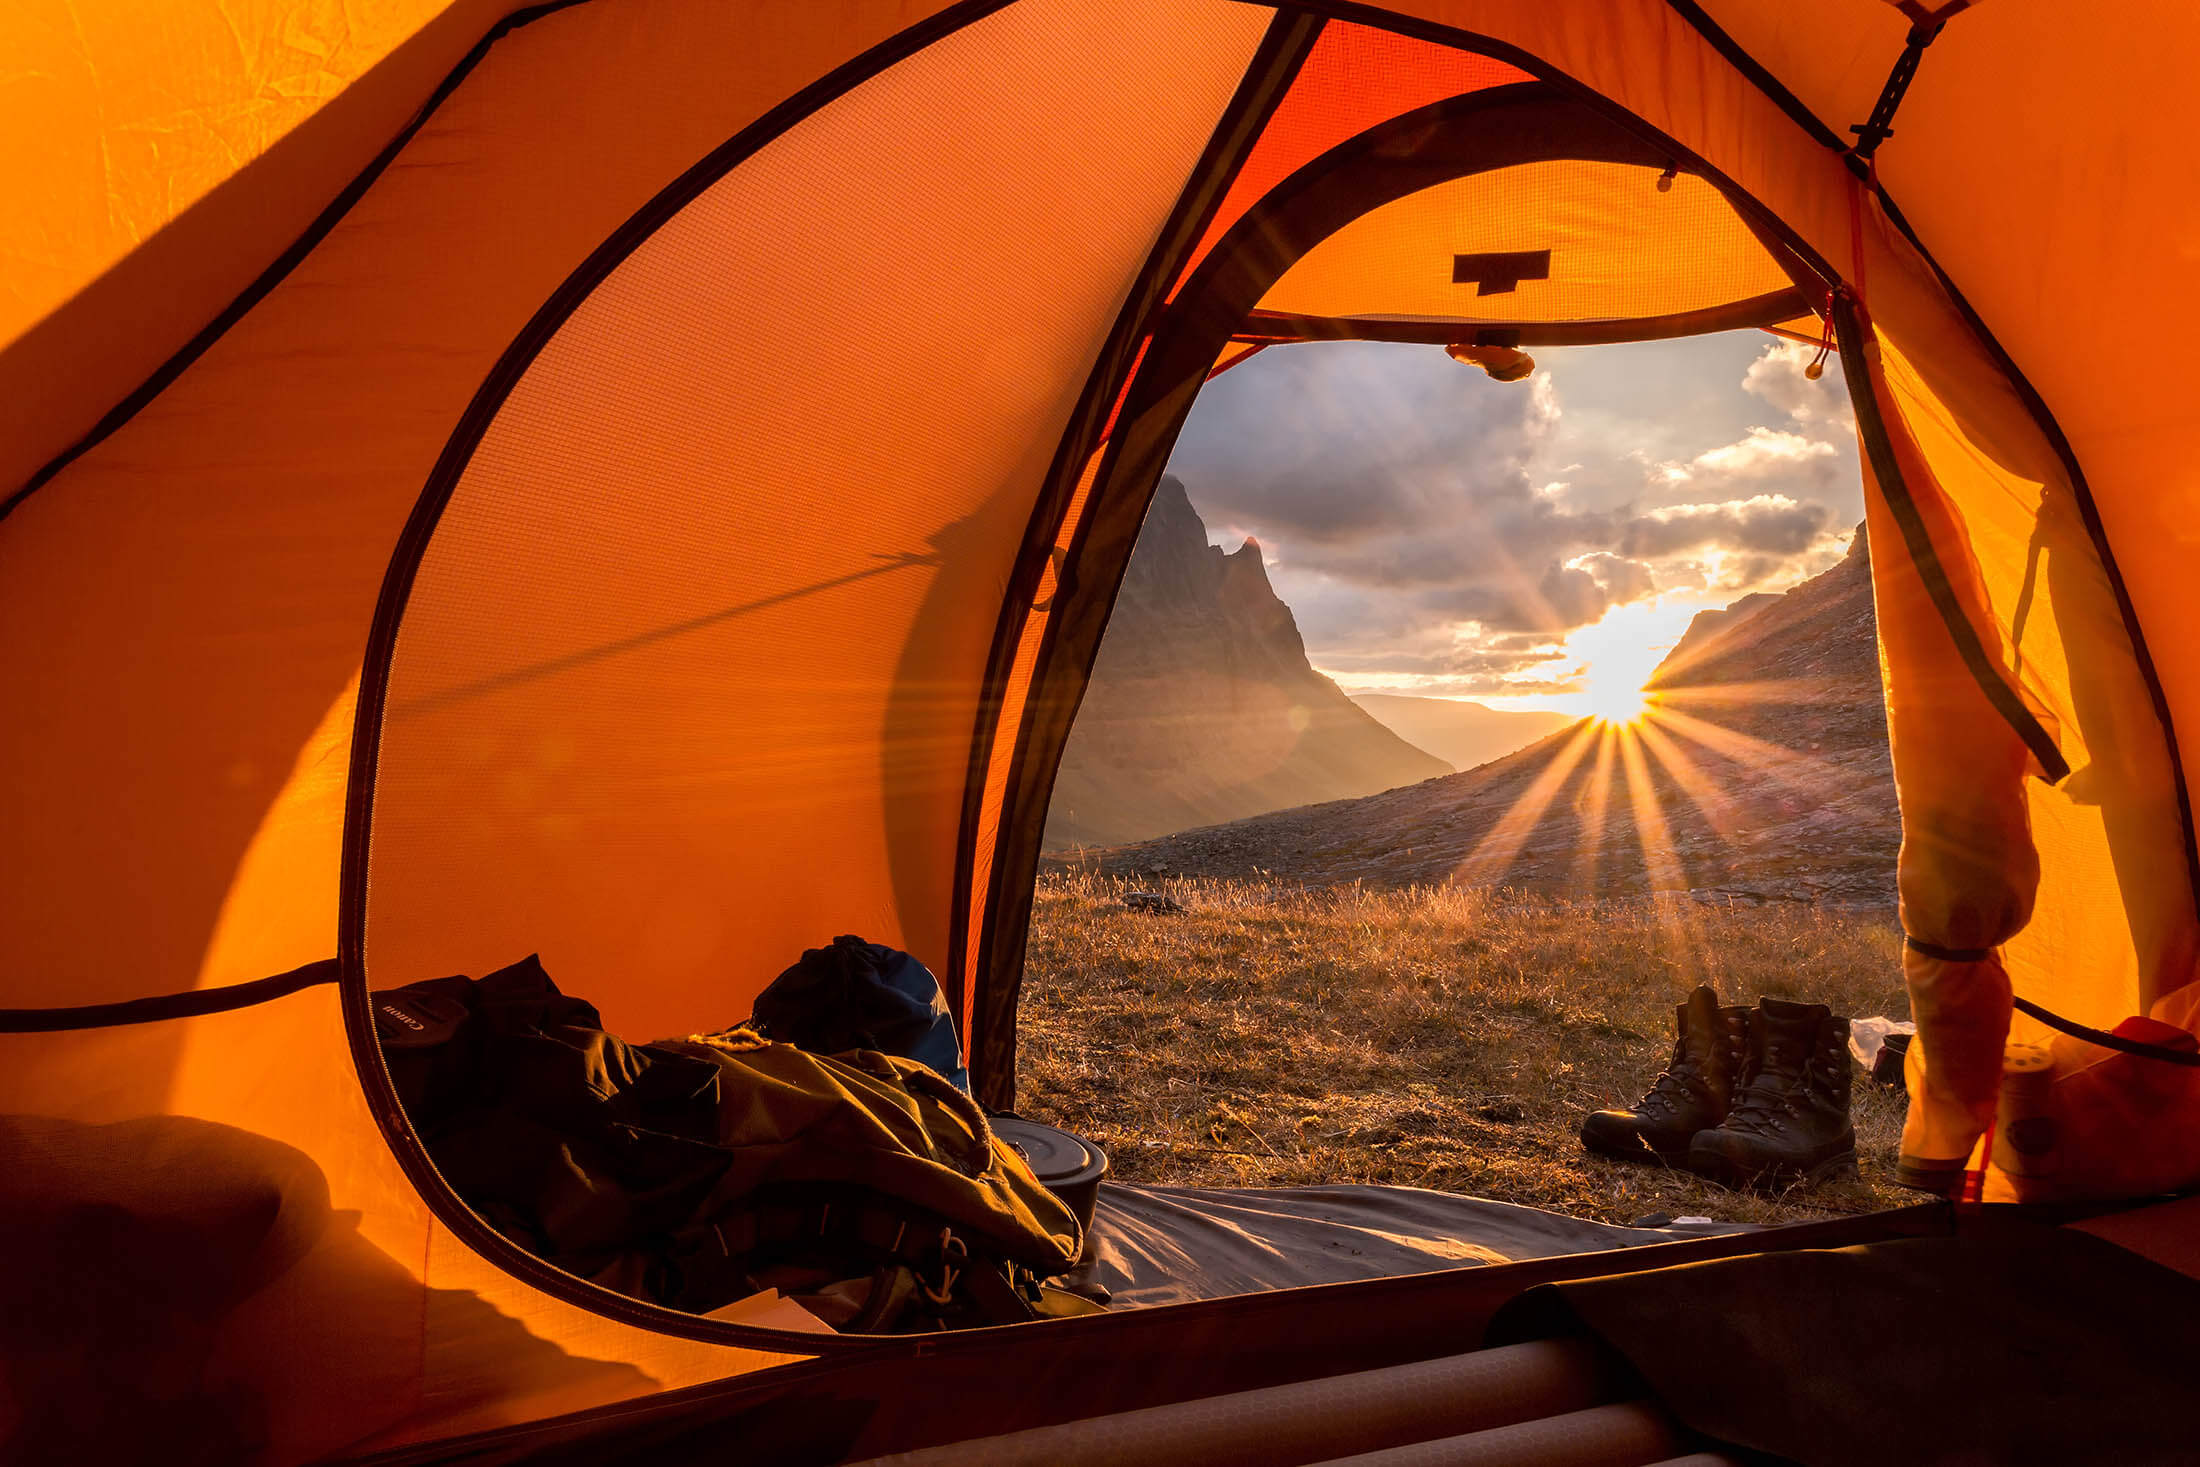 View from inside tent at sunrise